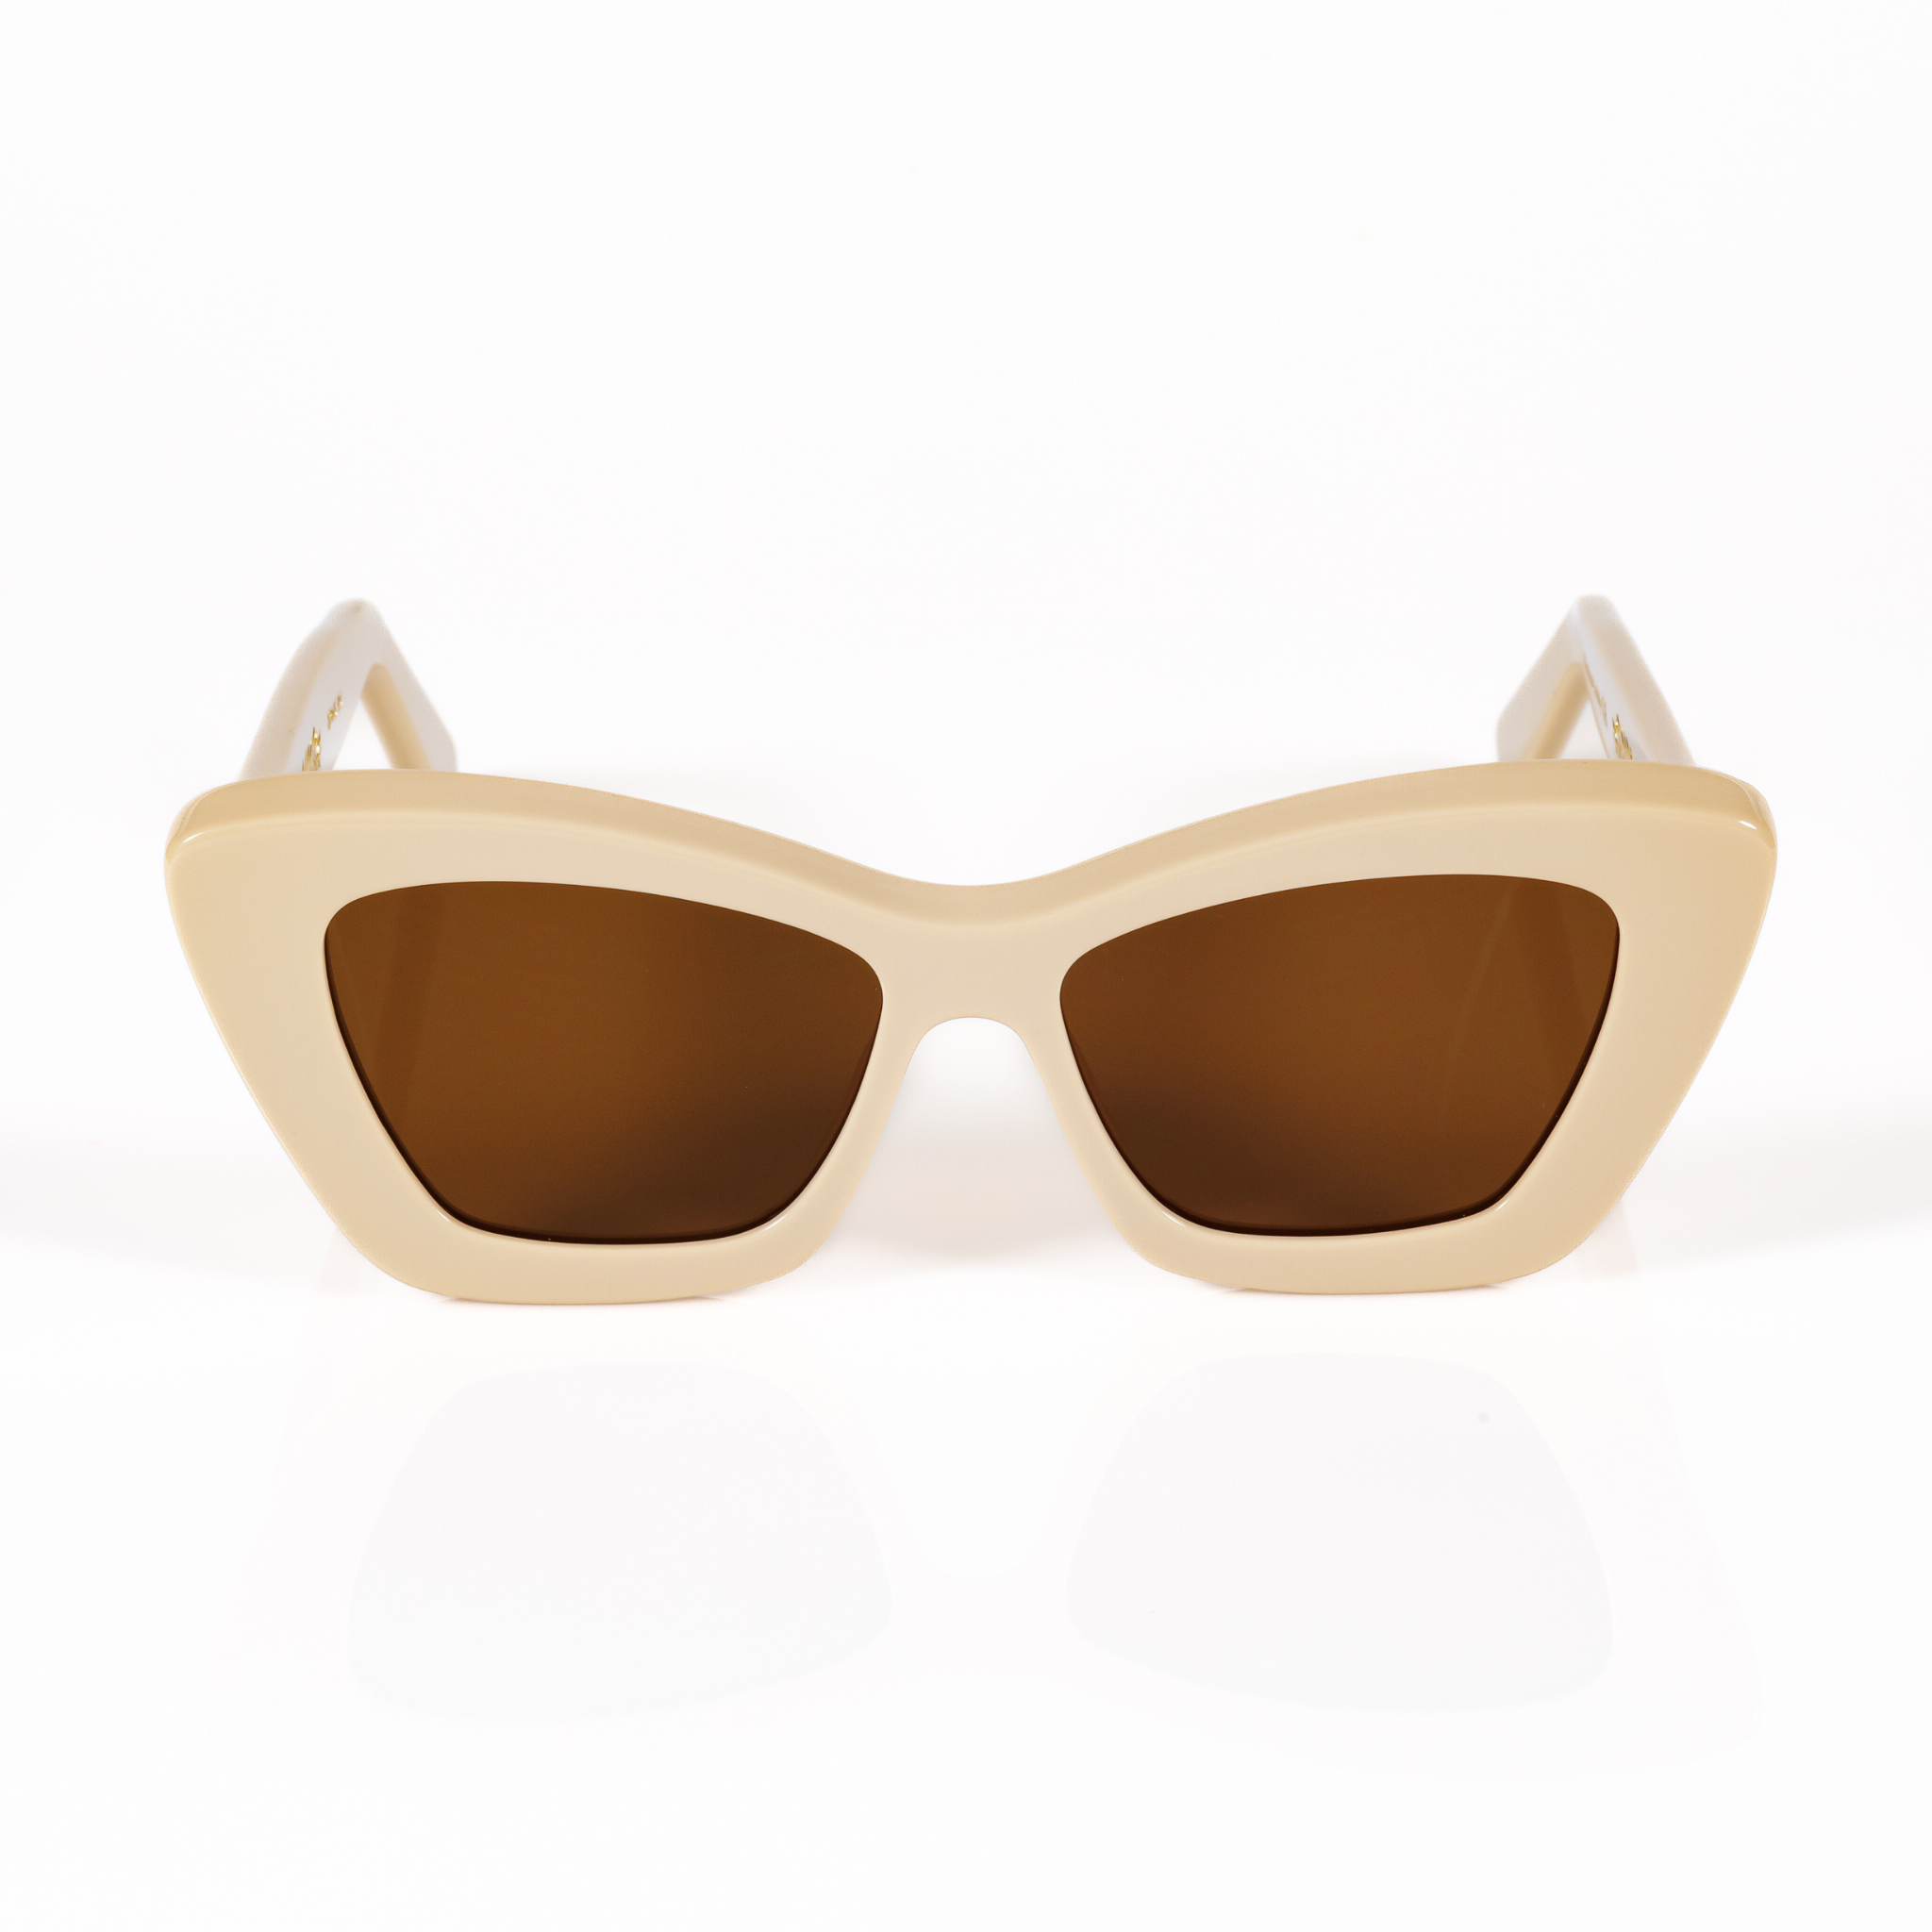 cat eye sunglasses small fit for small faces ivory brown lens front